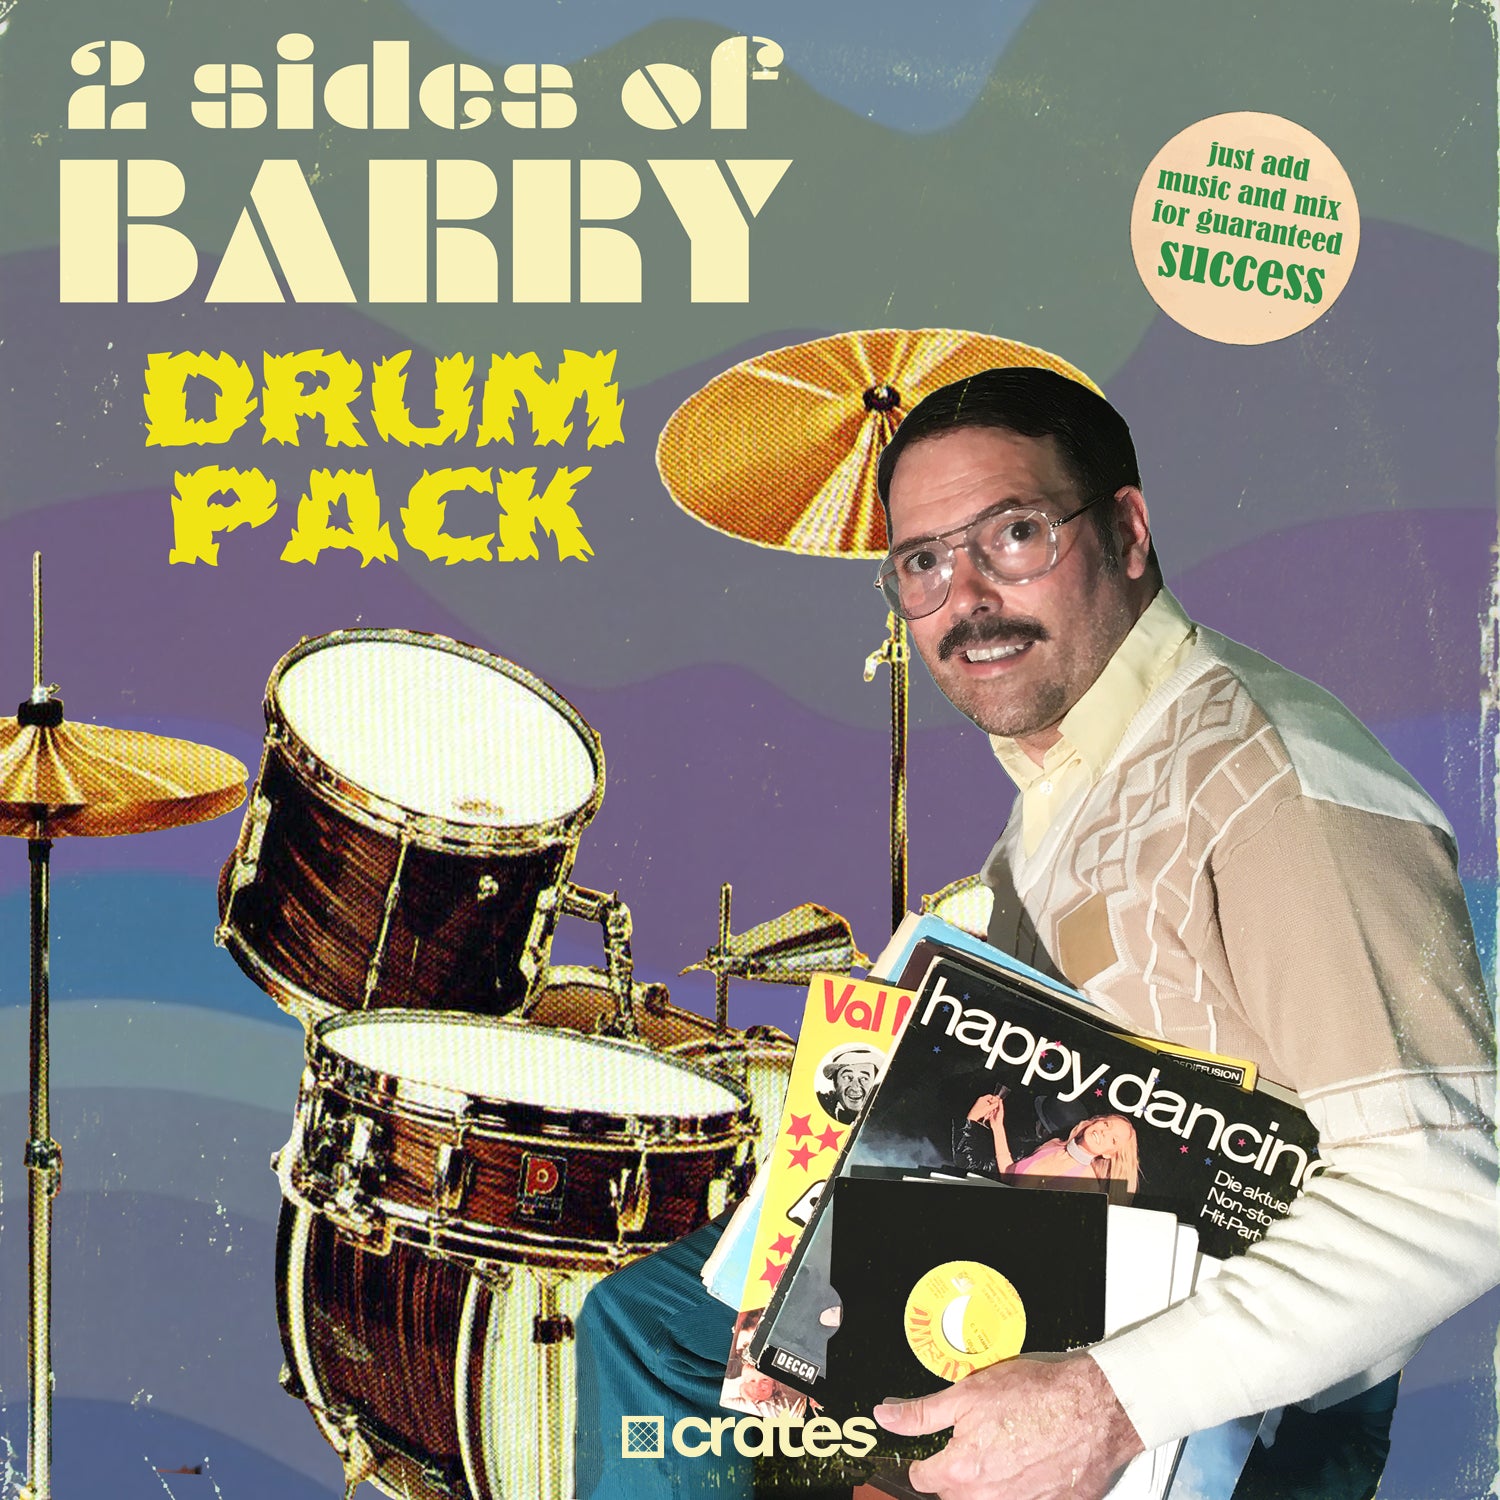 Barry Beats - 2 Sides of Barry Drum Pack